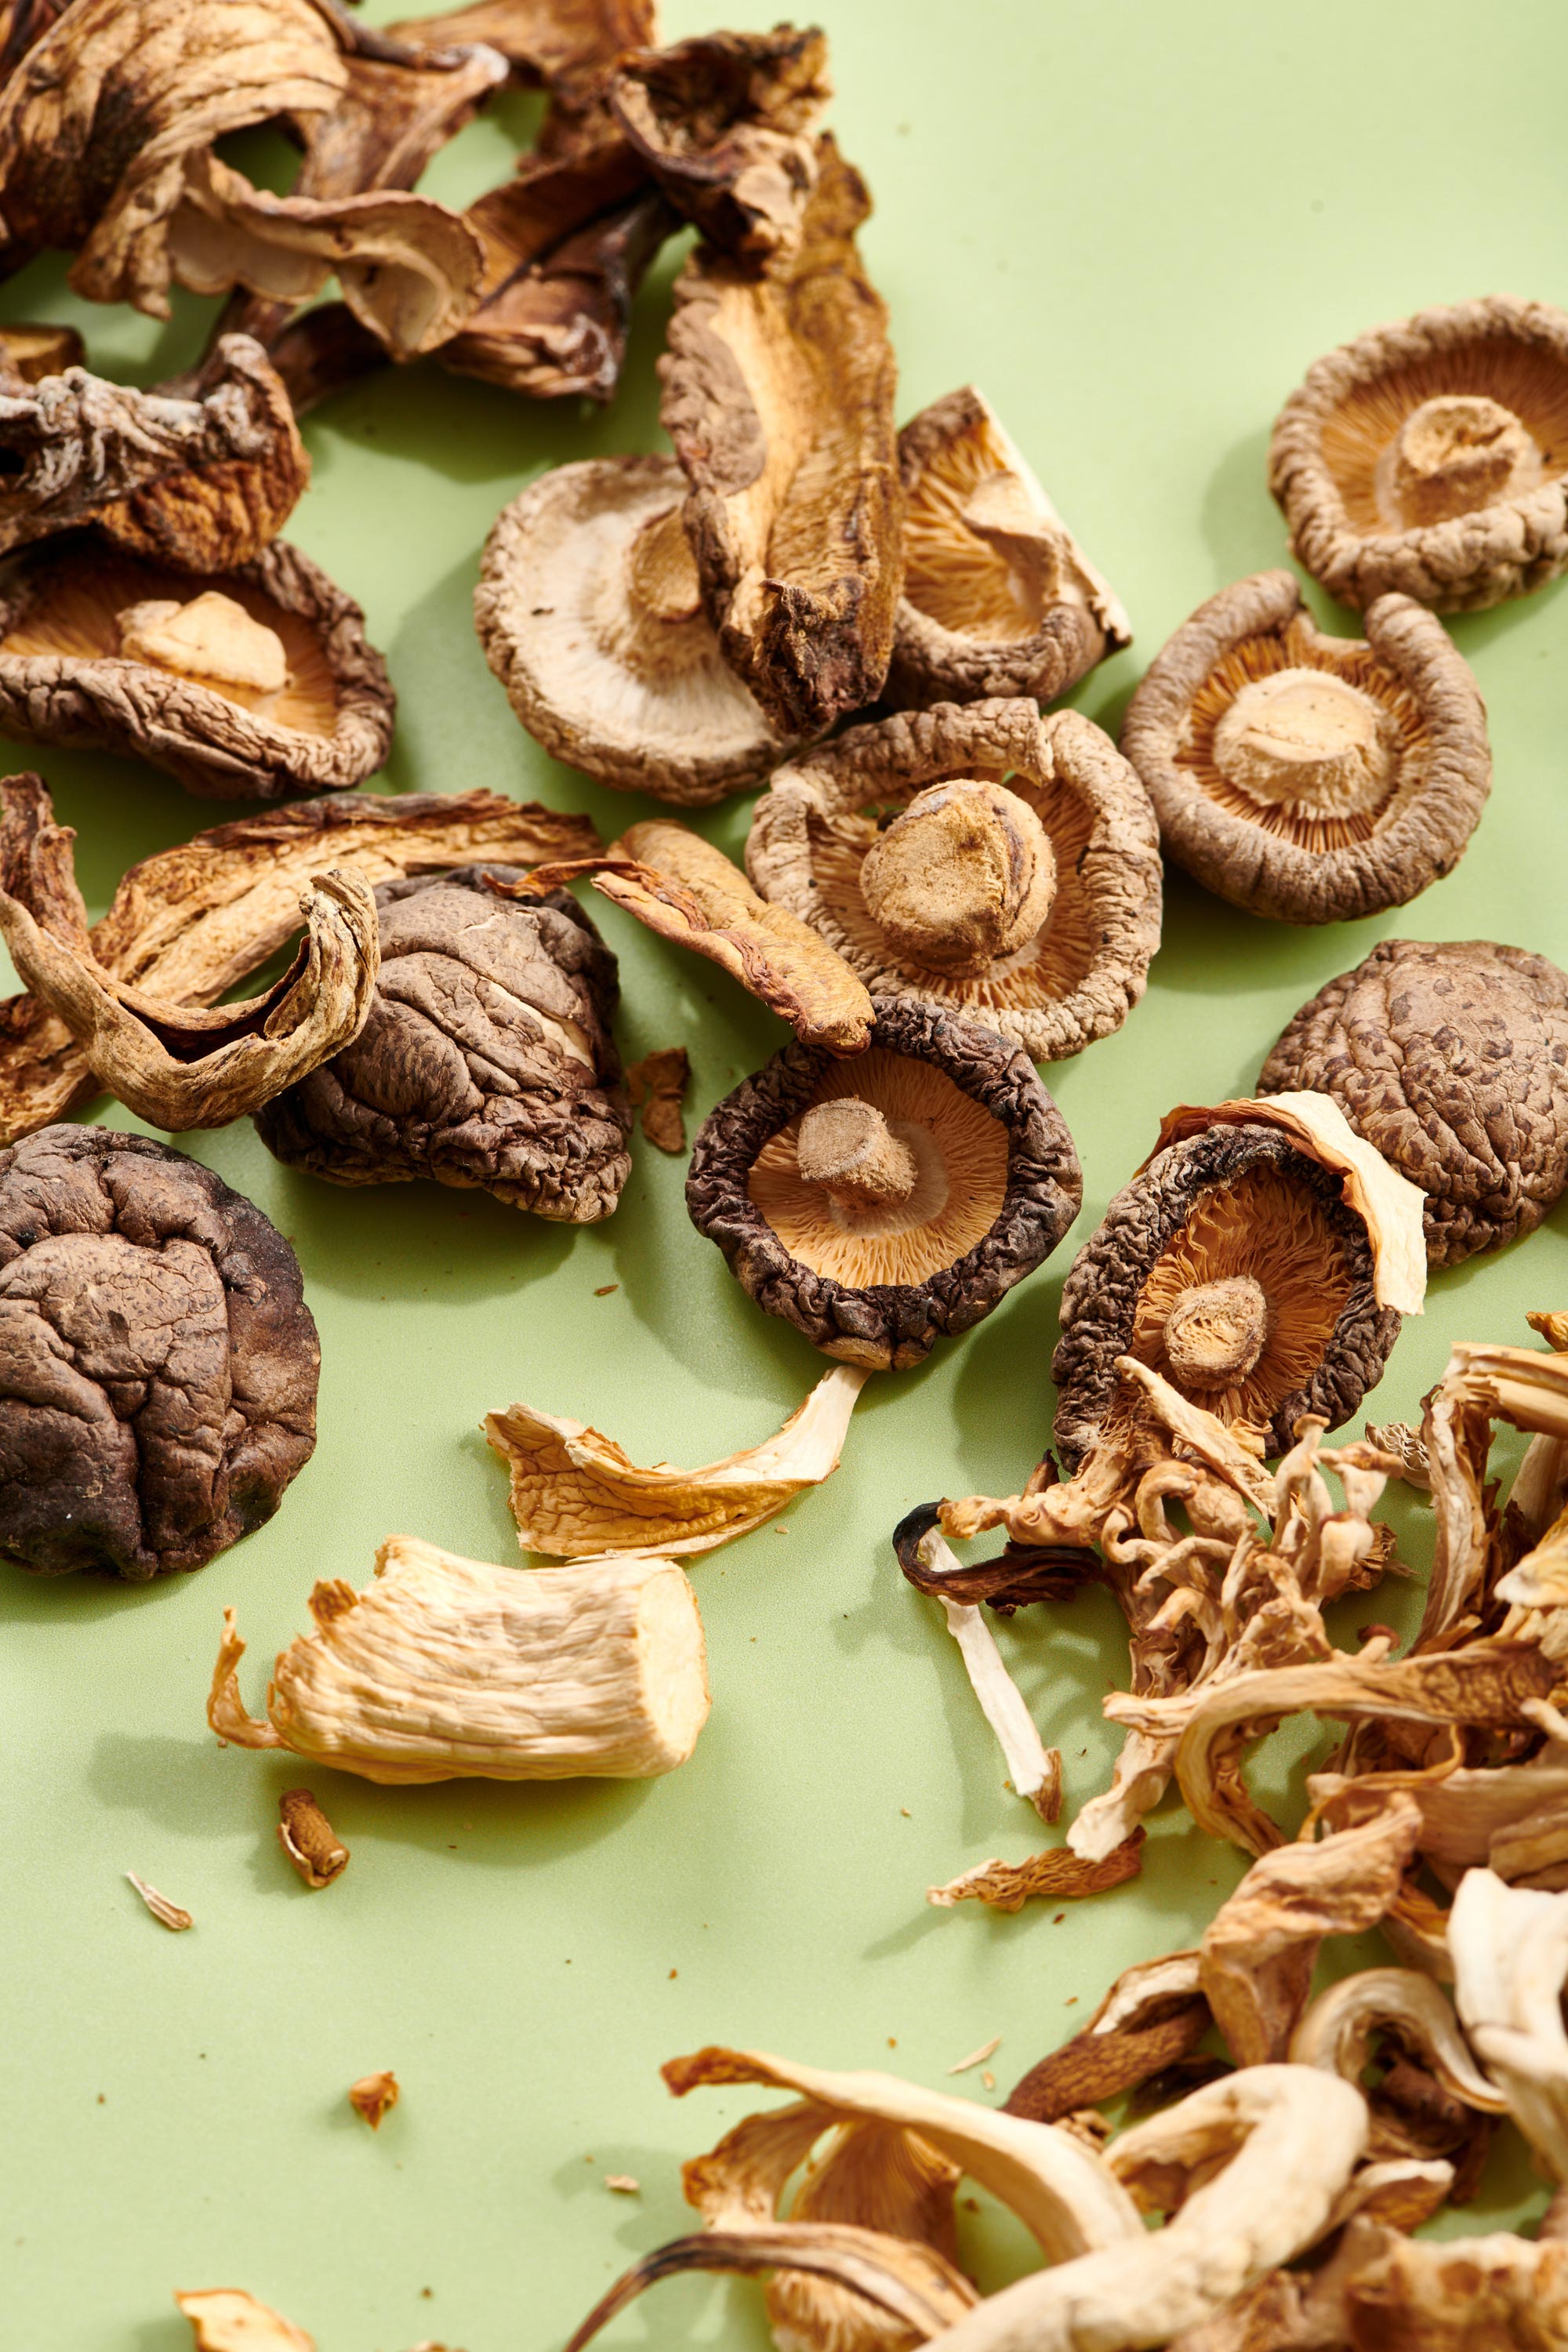 Various dried mushrooms on a pale green background.